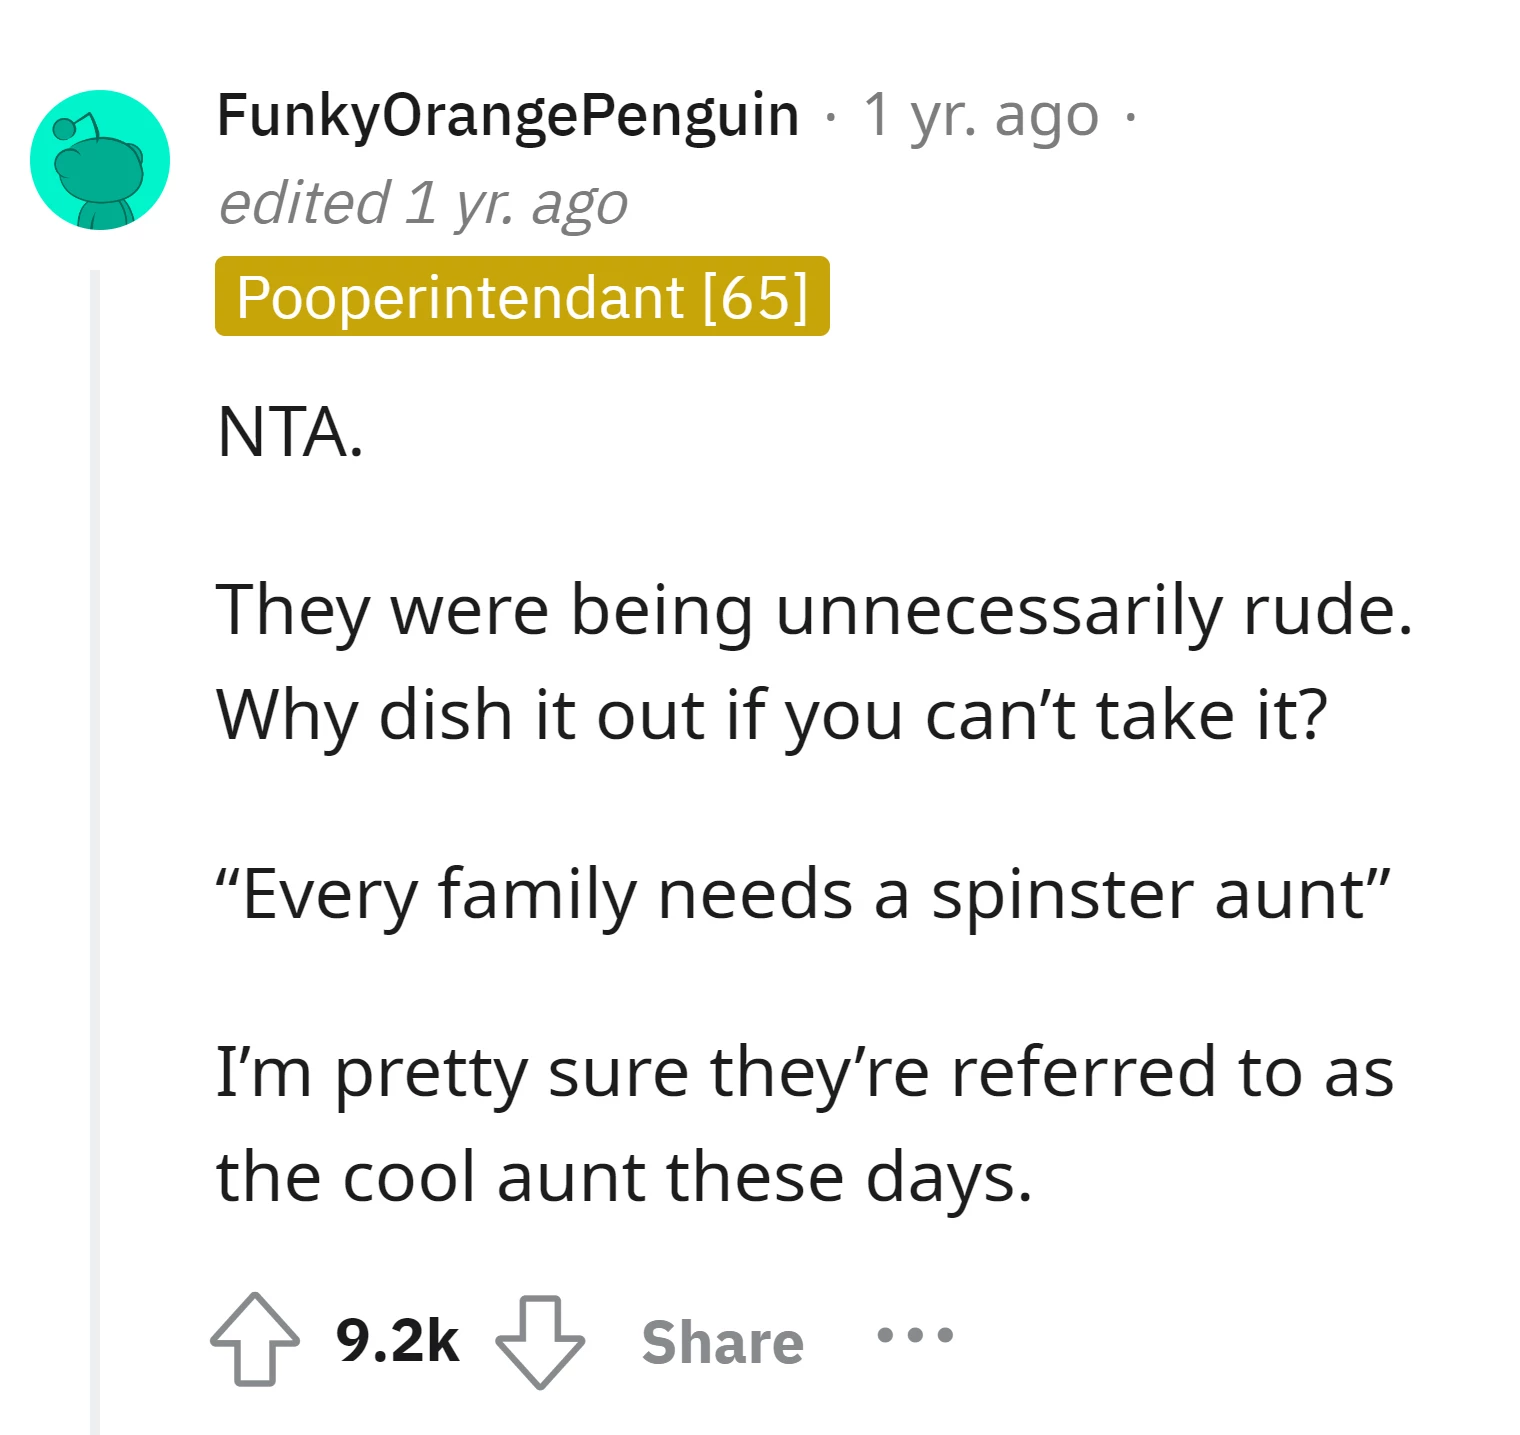 OP's more commonly known as the "cool aunt"